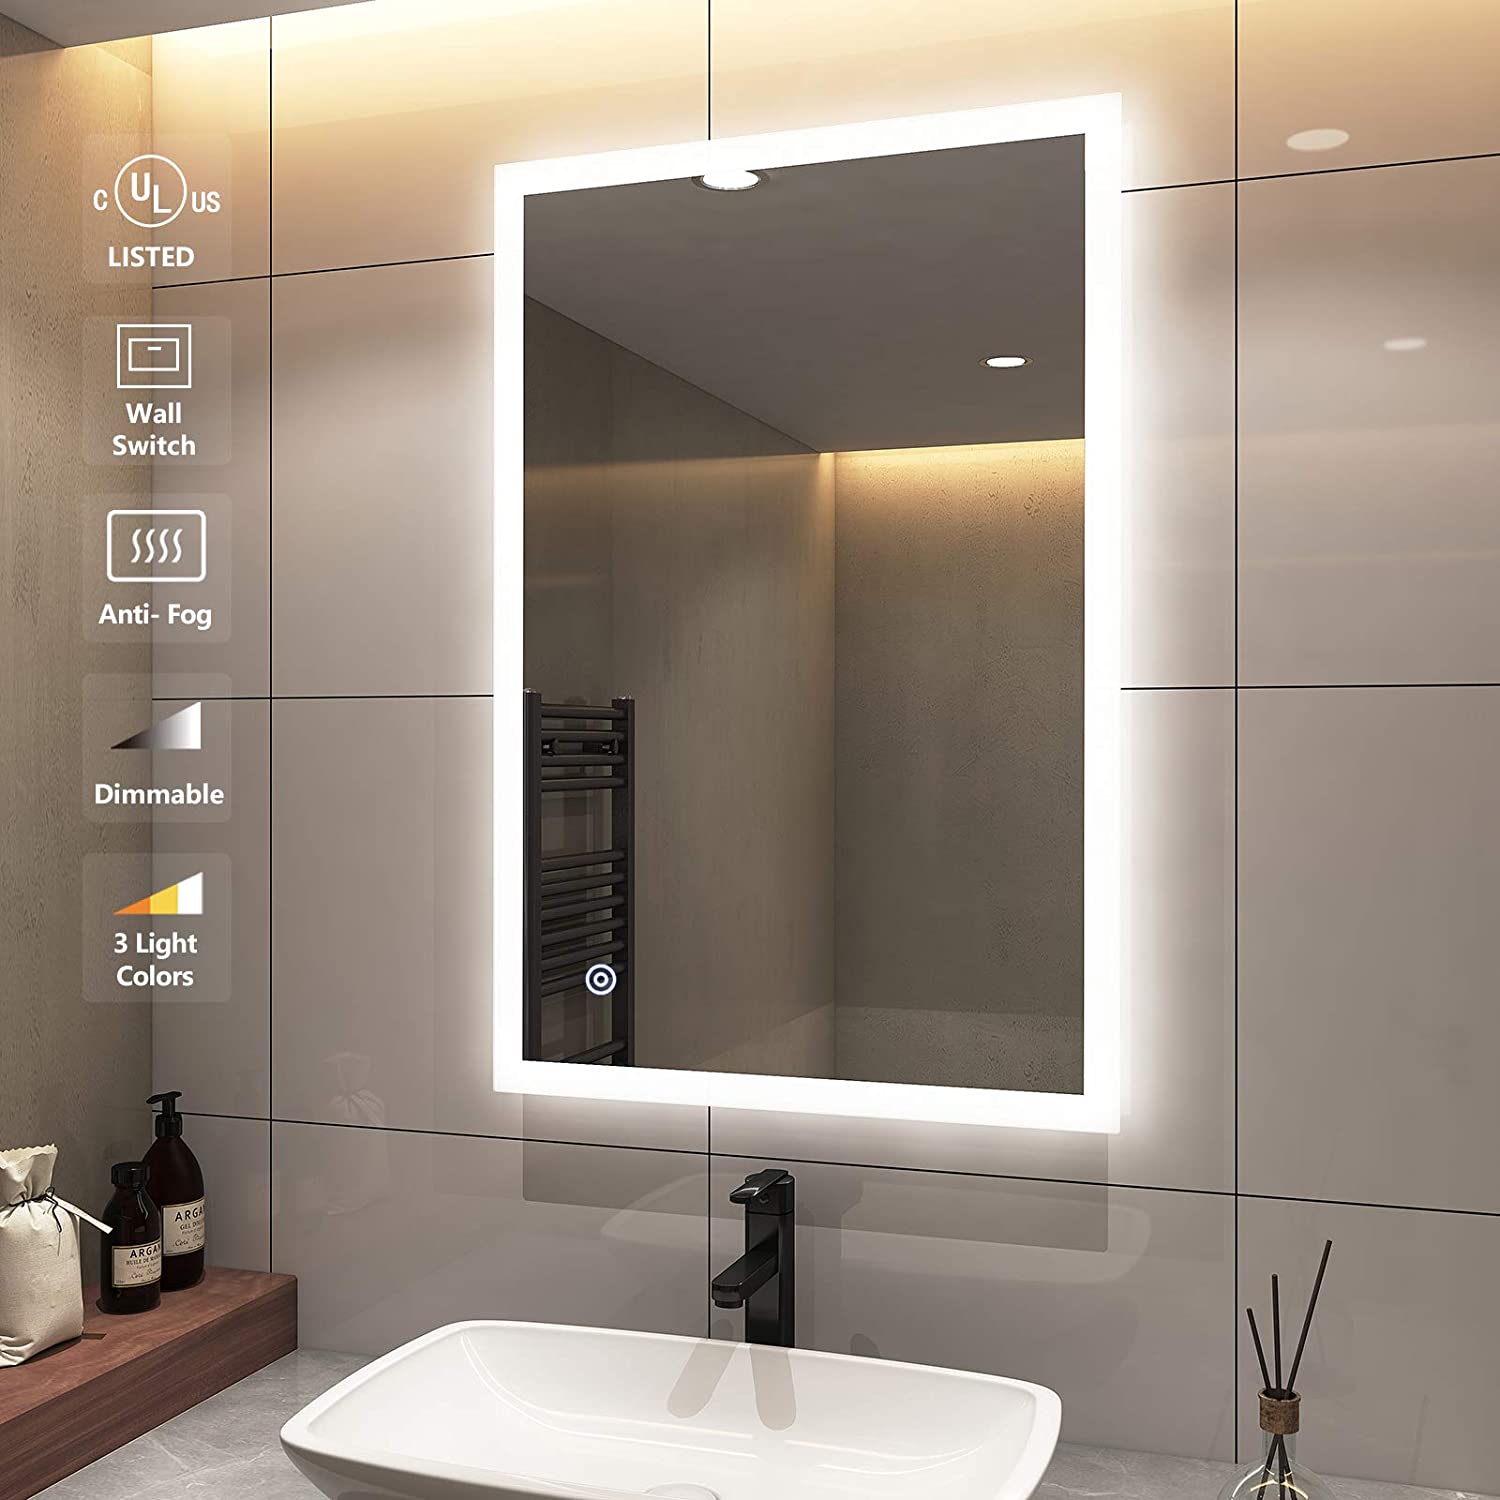 LED illuminated bathroom mirror are stylishly designed so they add some charm to your bathroom